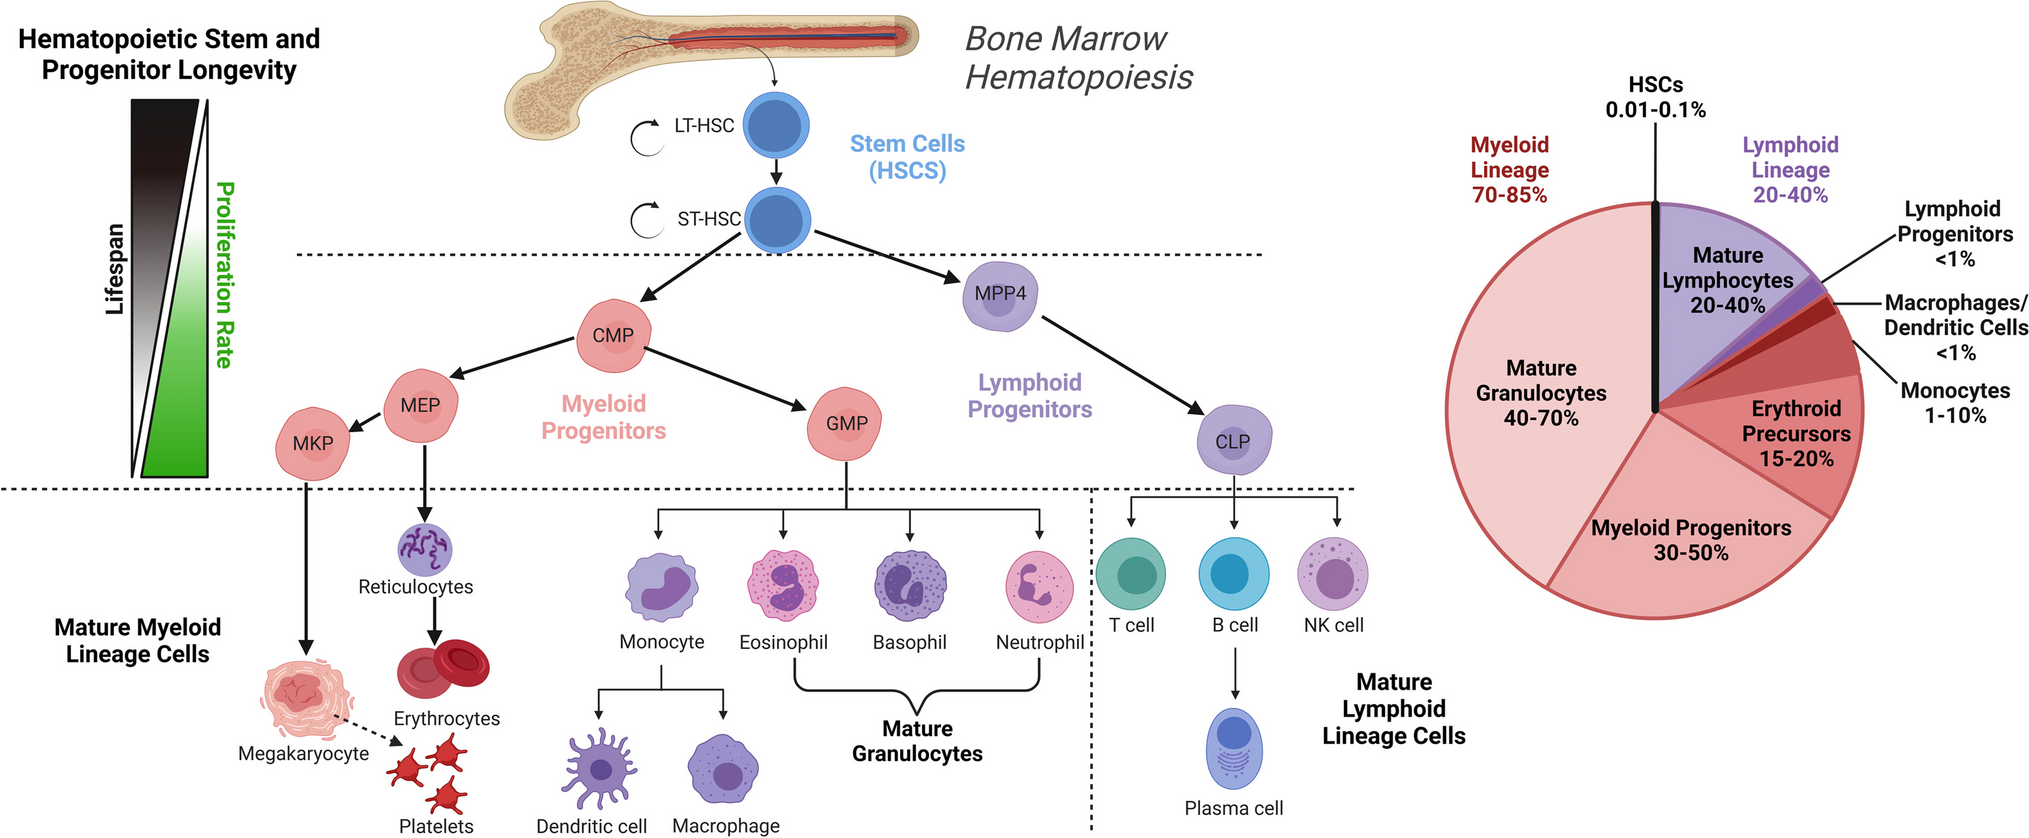 Interplay Between Skeletal and Hematopoietic Cells in the Bone Marrow Microenvironment in Homeostasis and Aging